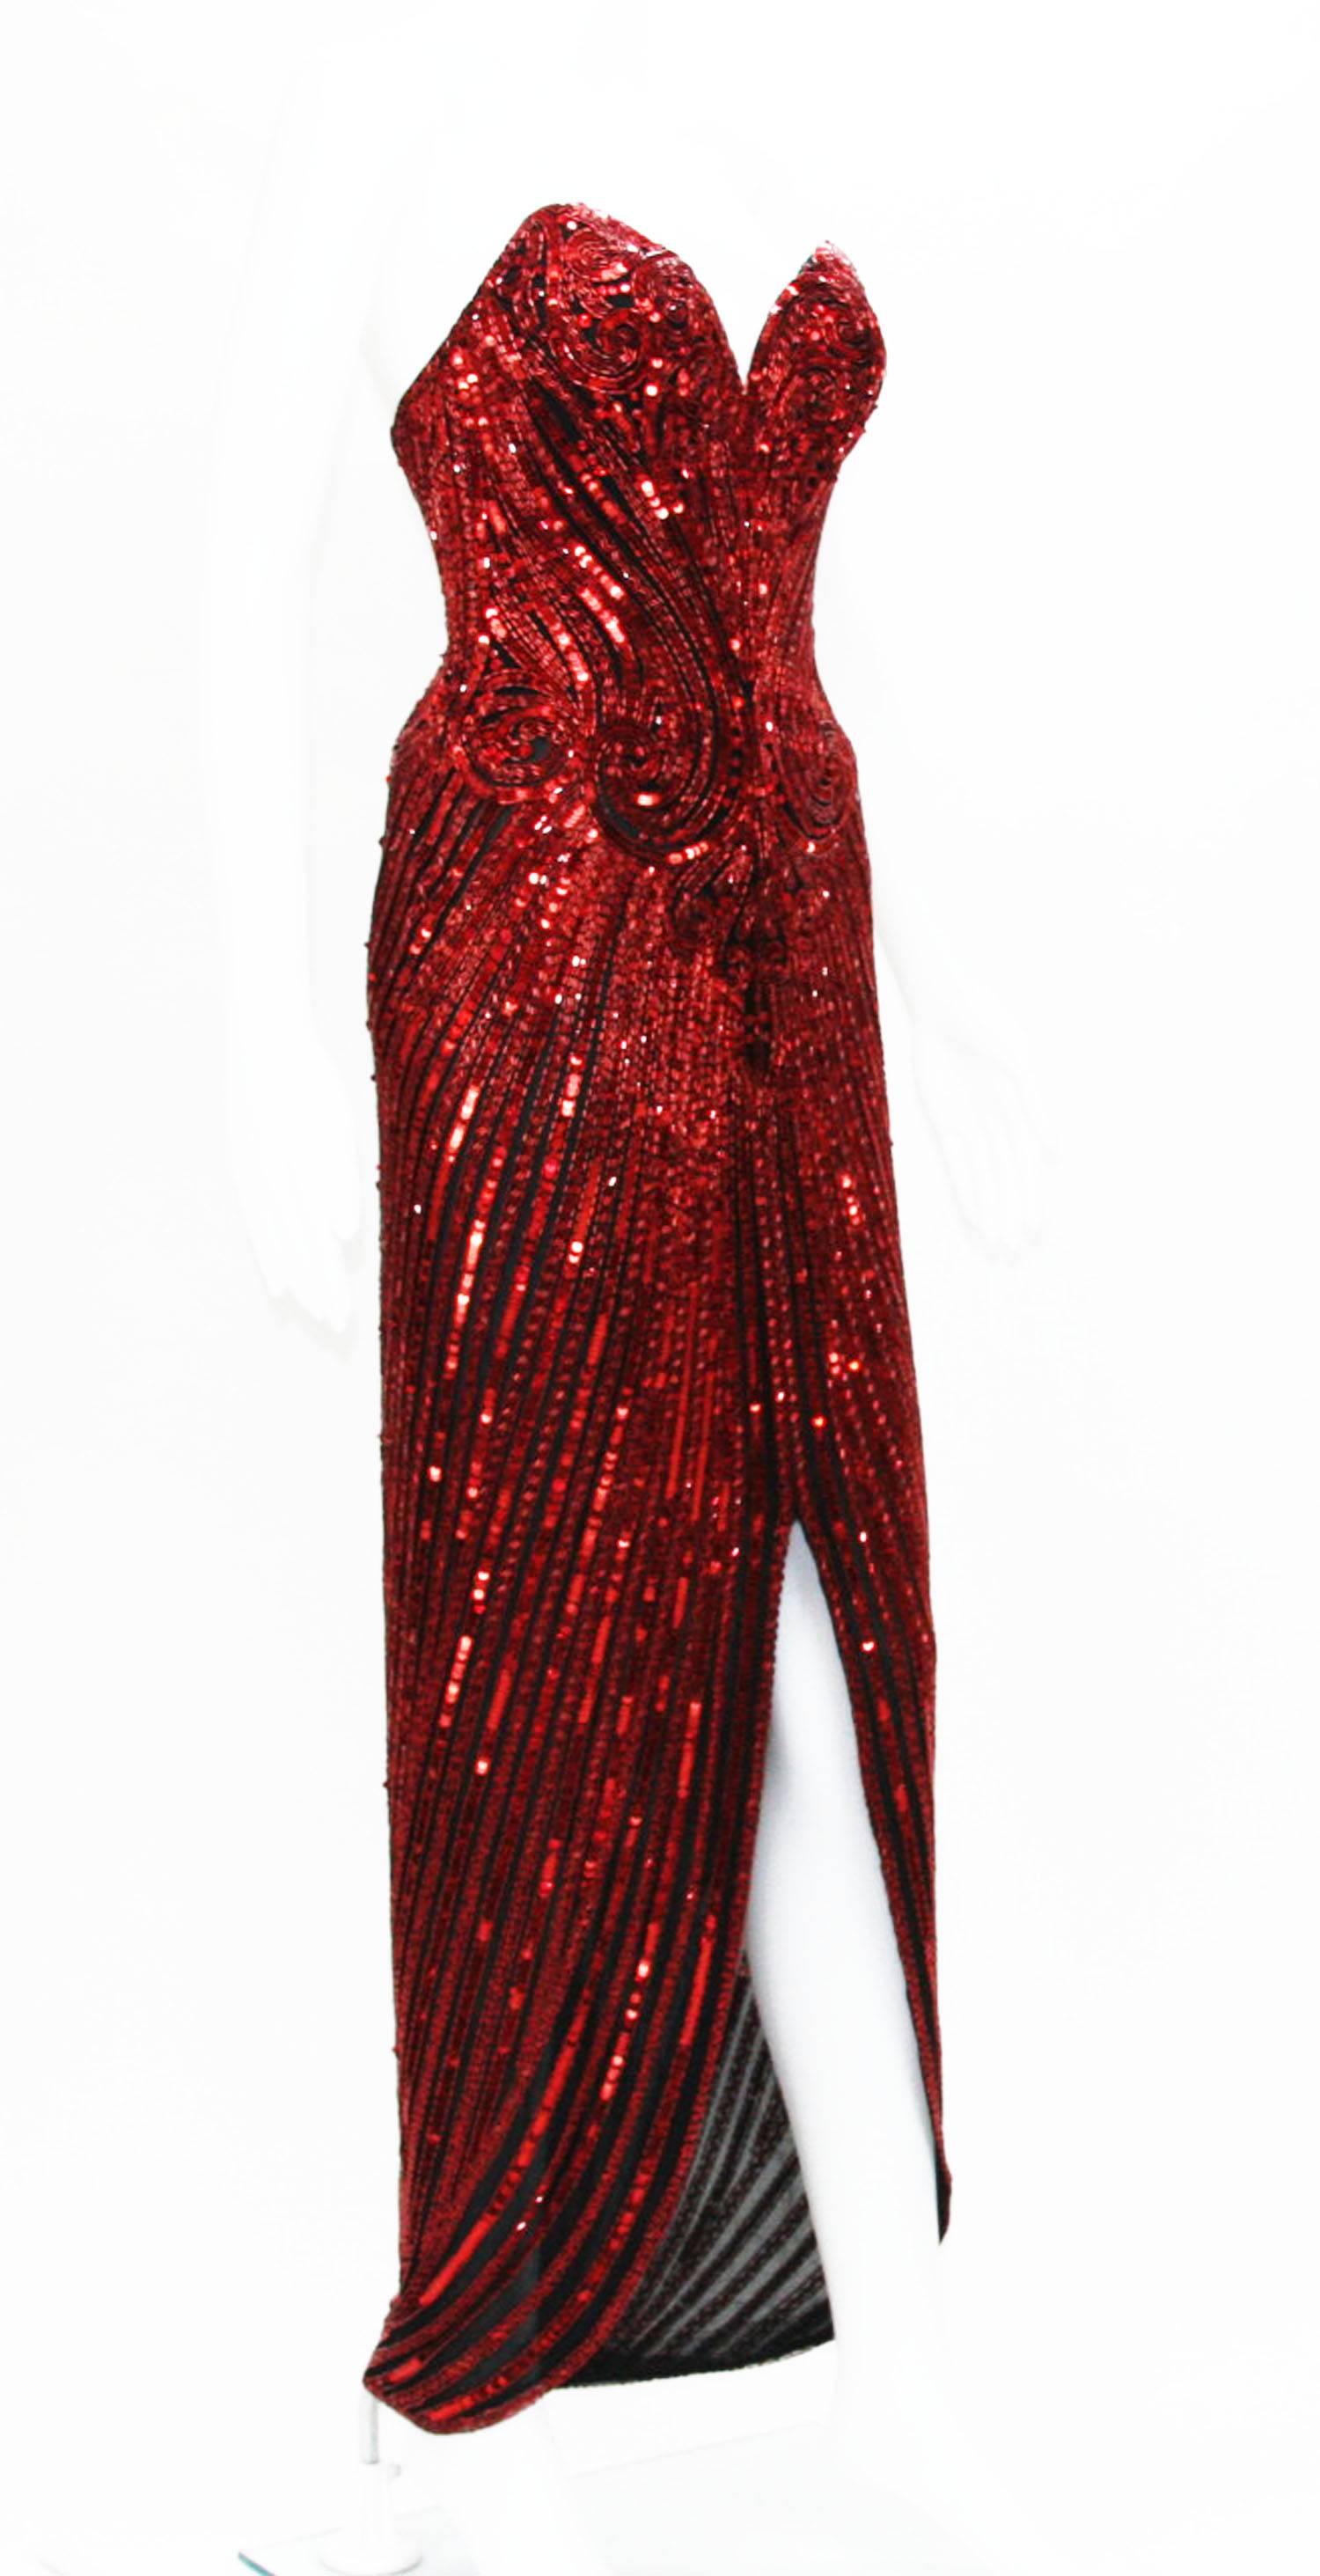 A magnificent 1982 Bob Mackie Gown.
Designer size 6. 
Color - Dark Red.
Embellished with Beads and Sequins Over the Black Net.
Corset and Waistband. Fully Lined.
Measurements: Bust - 32 inches, Waist - 26 inches, Hip - 34 inches. 
Fabric has some